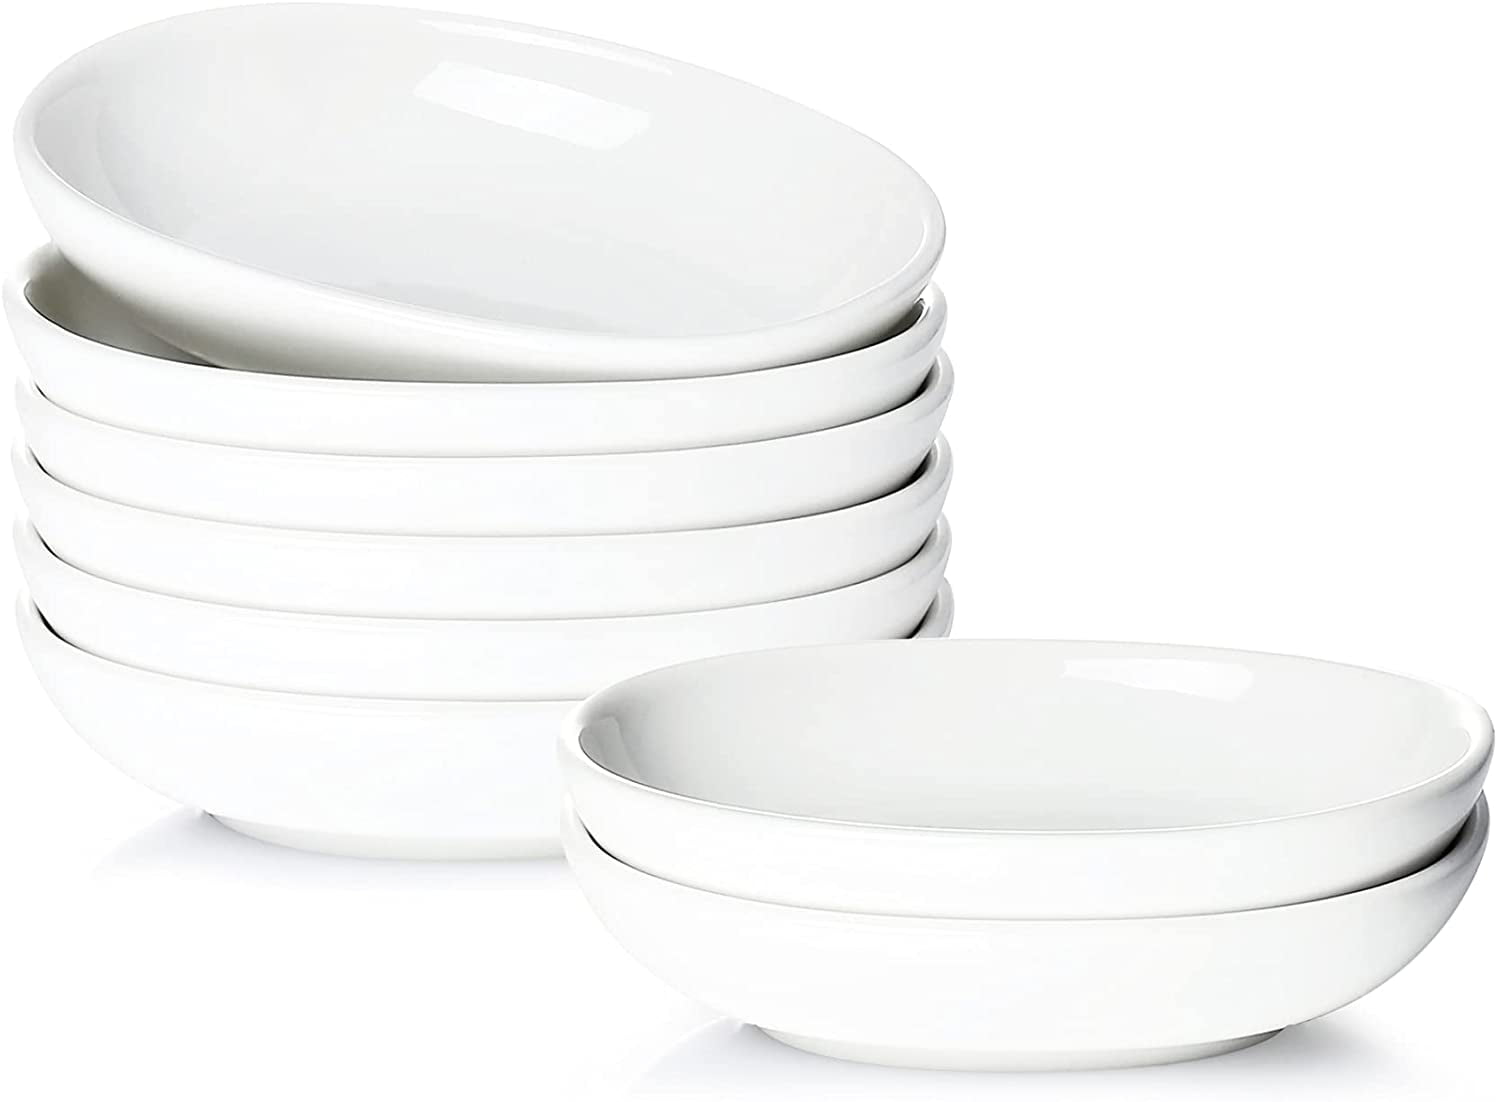 6x White Porcelain Soy Sauce Dipping Dish Plate S-3325x6 